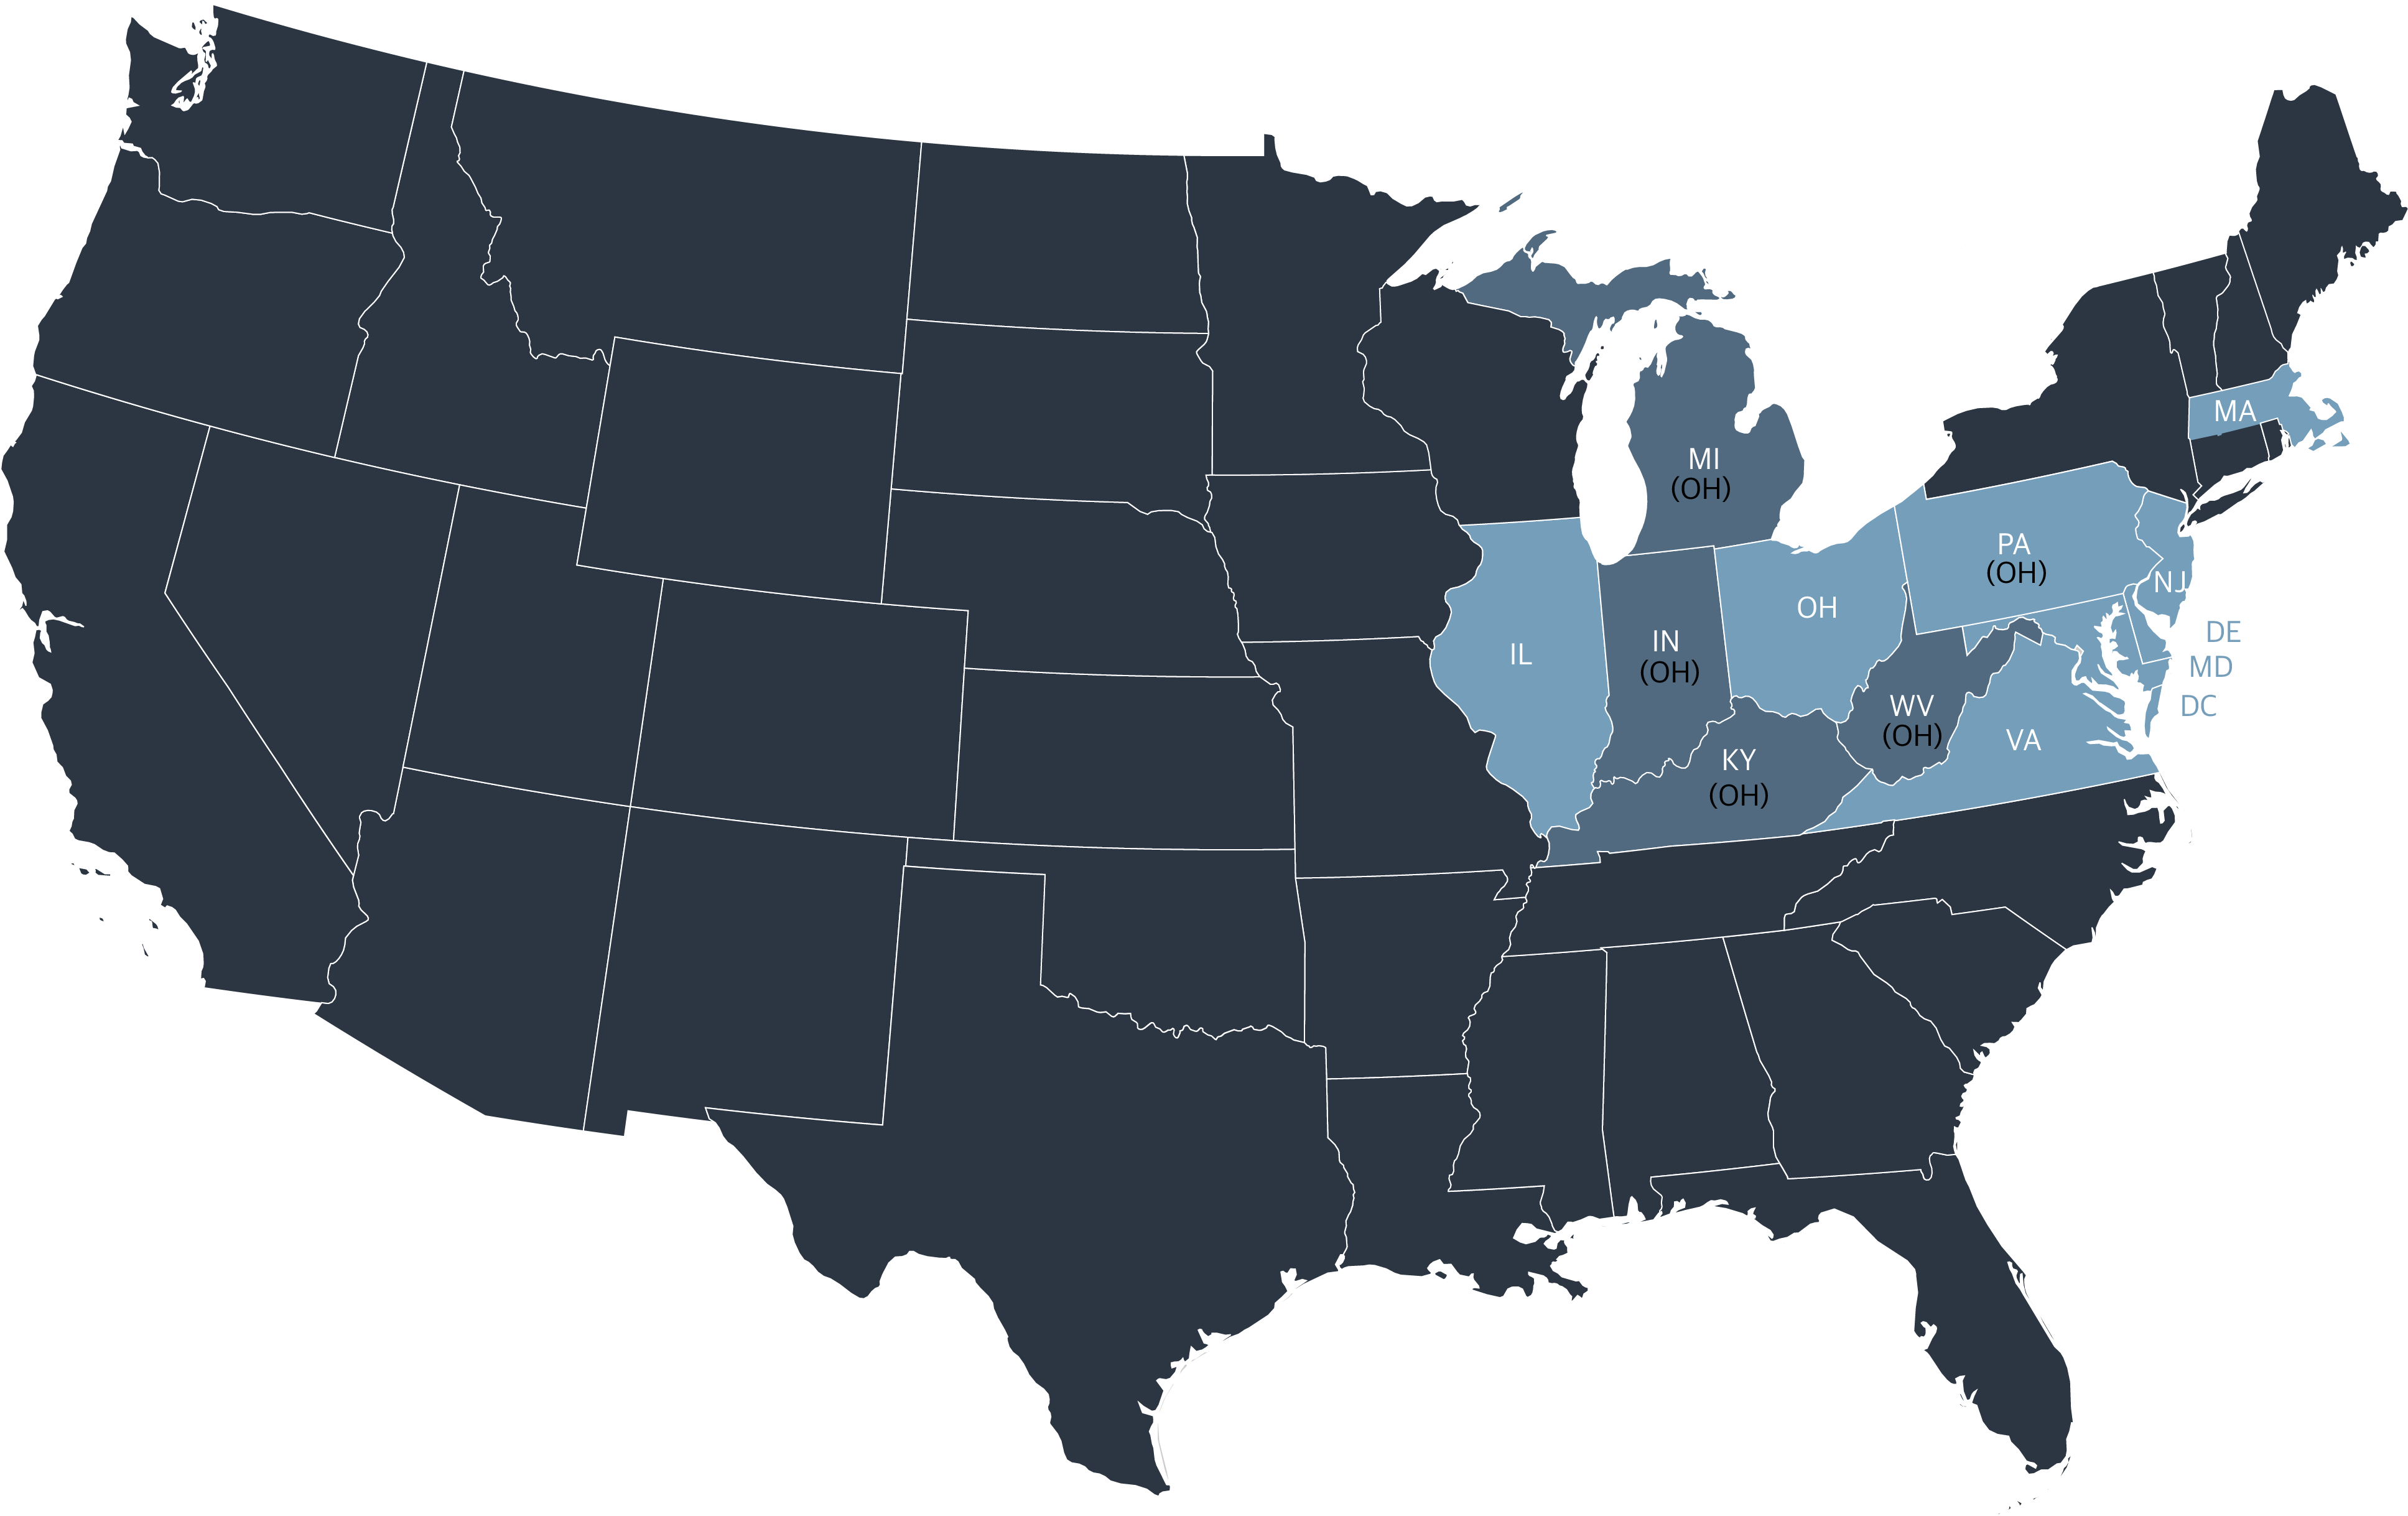 Map of the USA showing SREC states